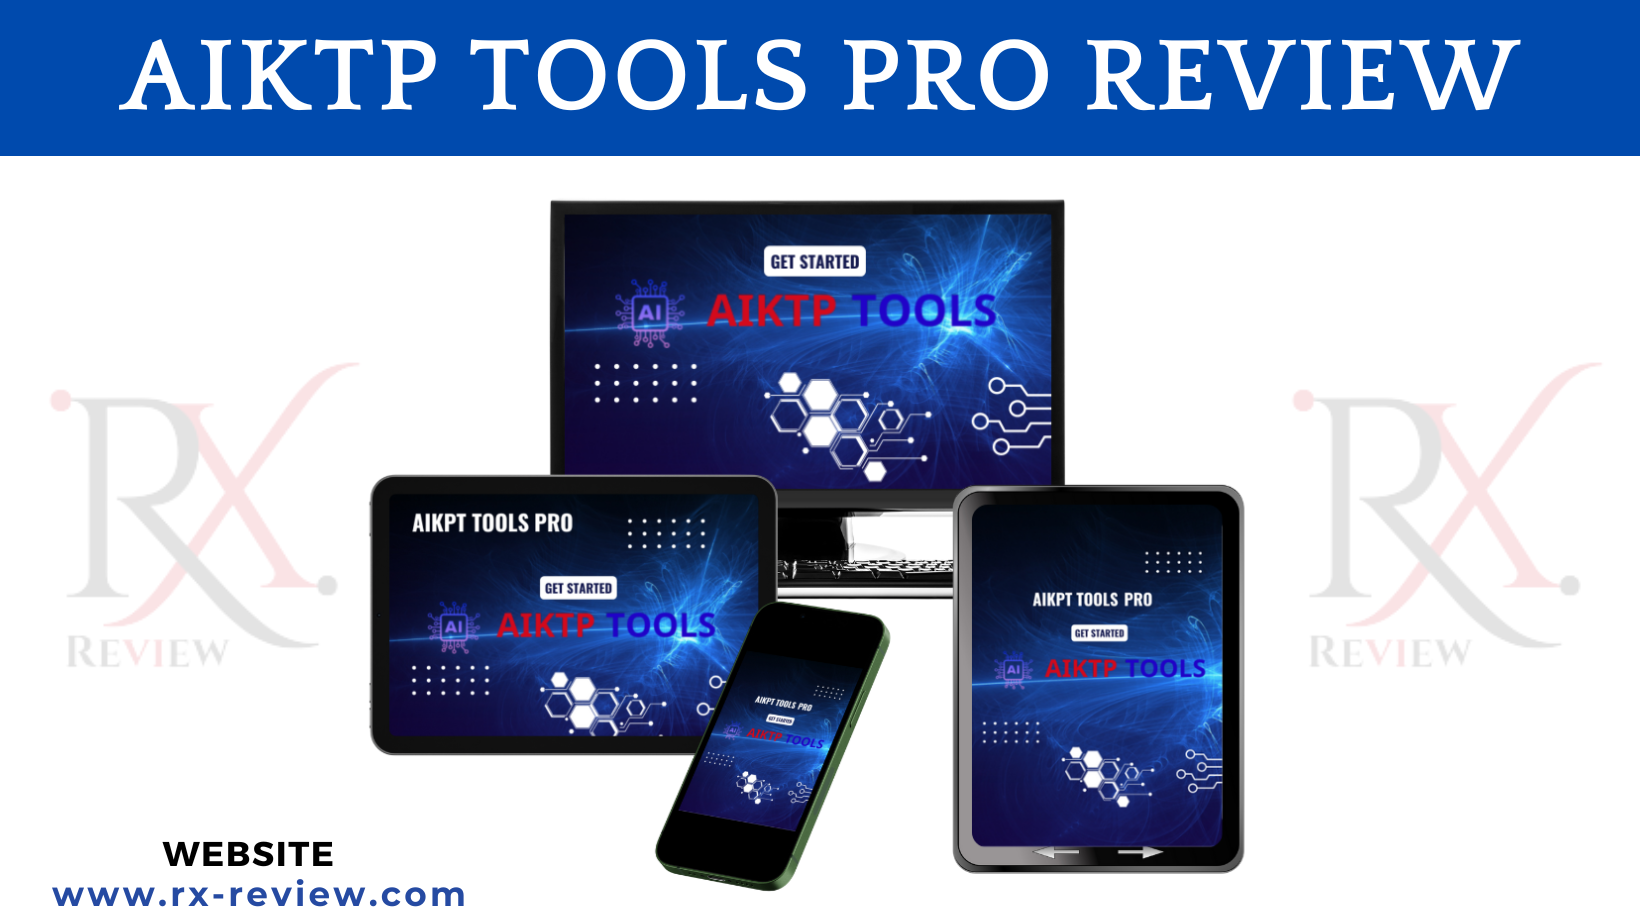 AIKTP TOOLS PRO Review - A Completely Automated Web Tool